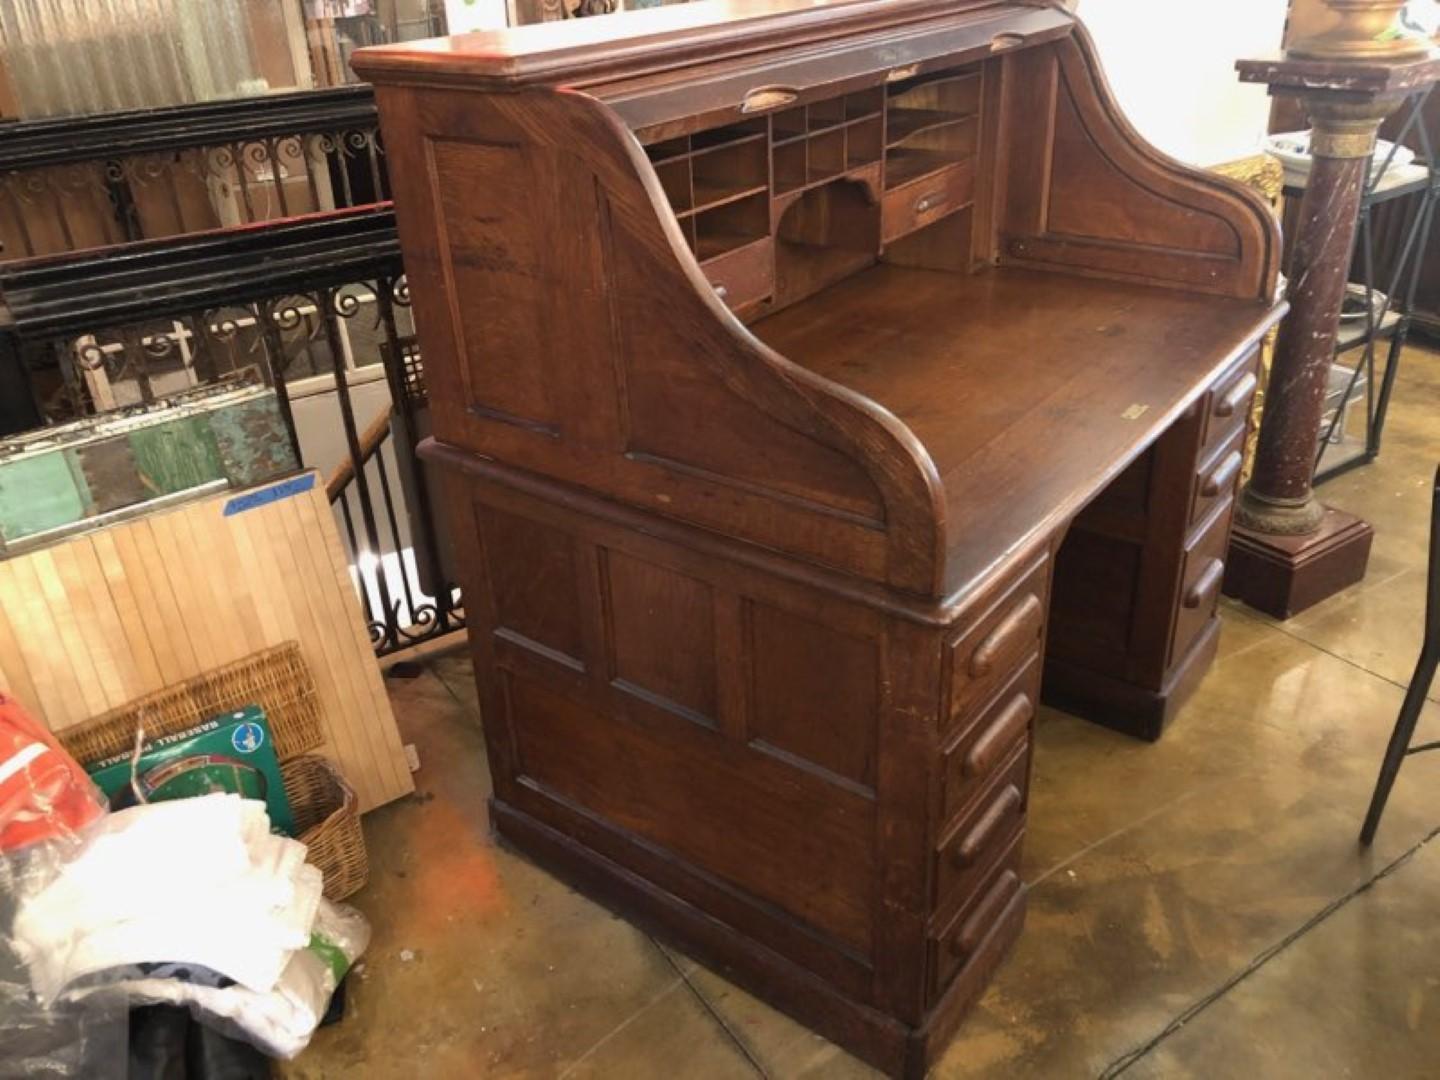 American 1880s Oak Roll Top Desk with Seven Drawers and Neat Cubbyhole Storage